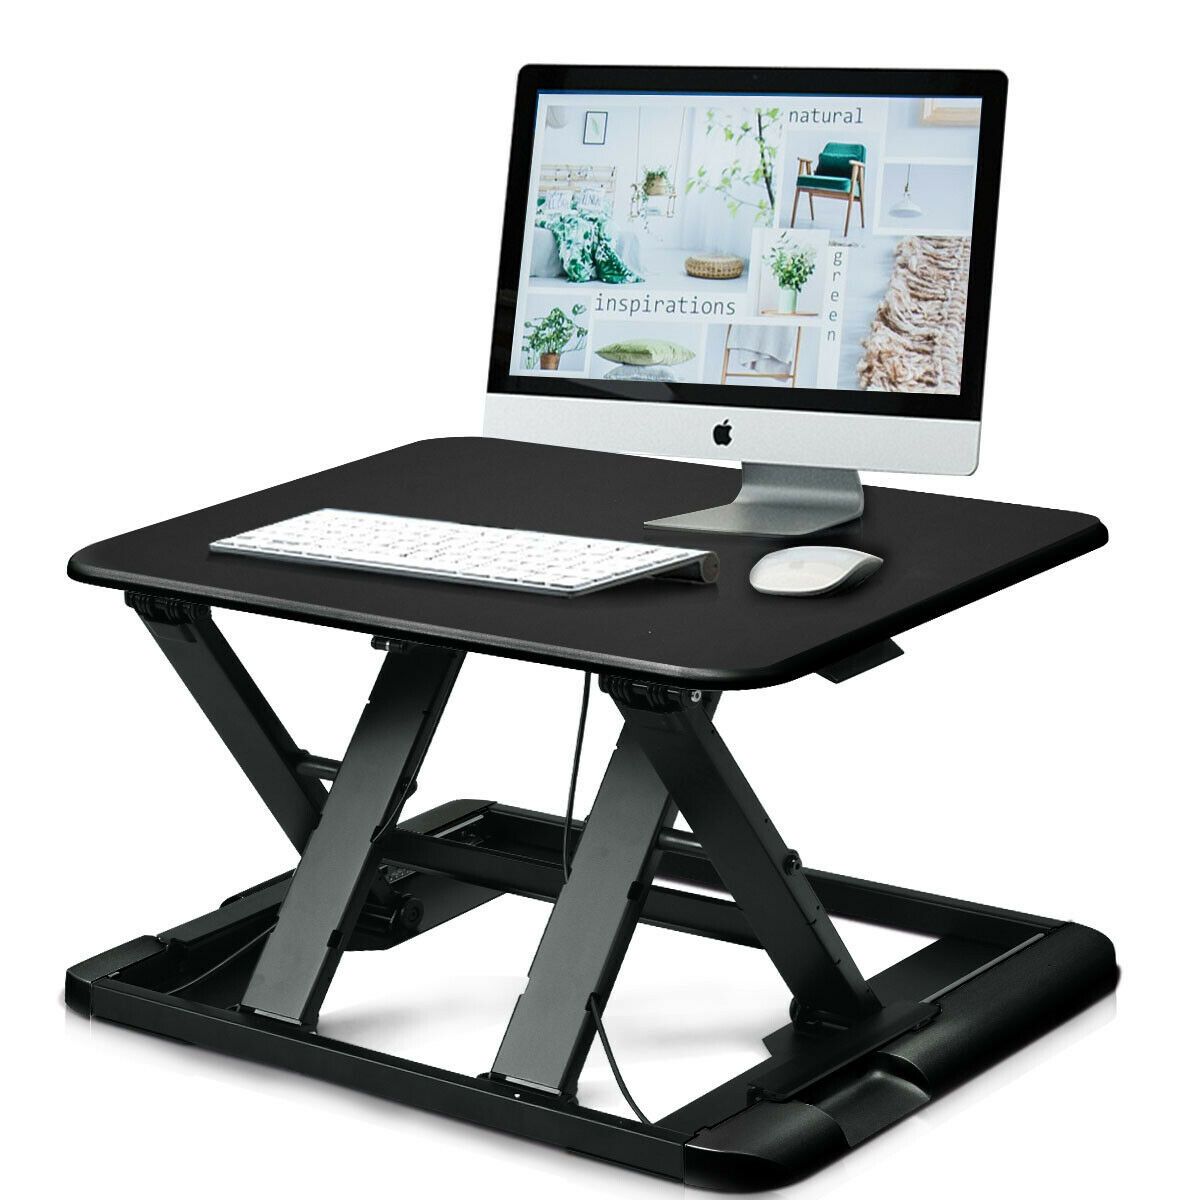 Gymax Adjustable Height Sit/stand Desk Computer Lift Riser Laptop Work With Regard To Adjustable Electric Lift Desks (View 11 of 15)